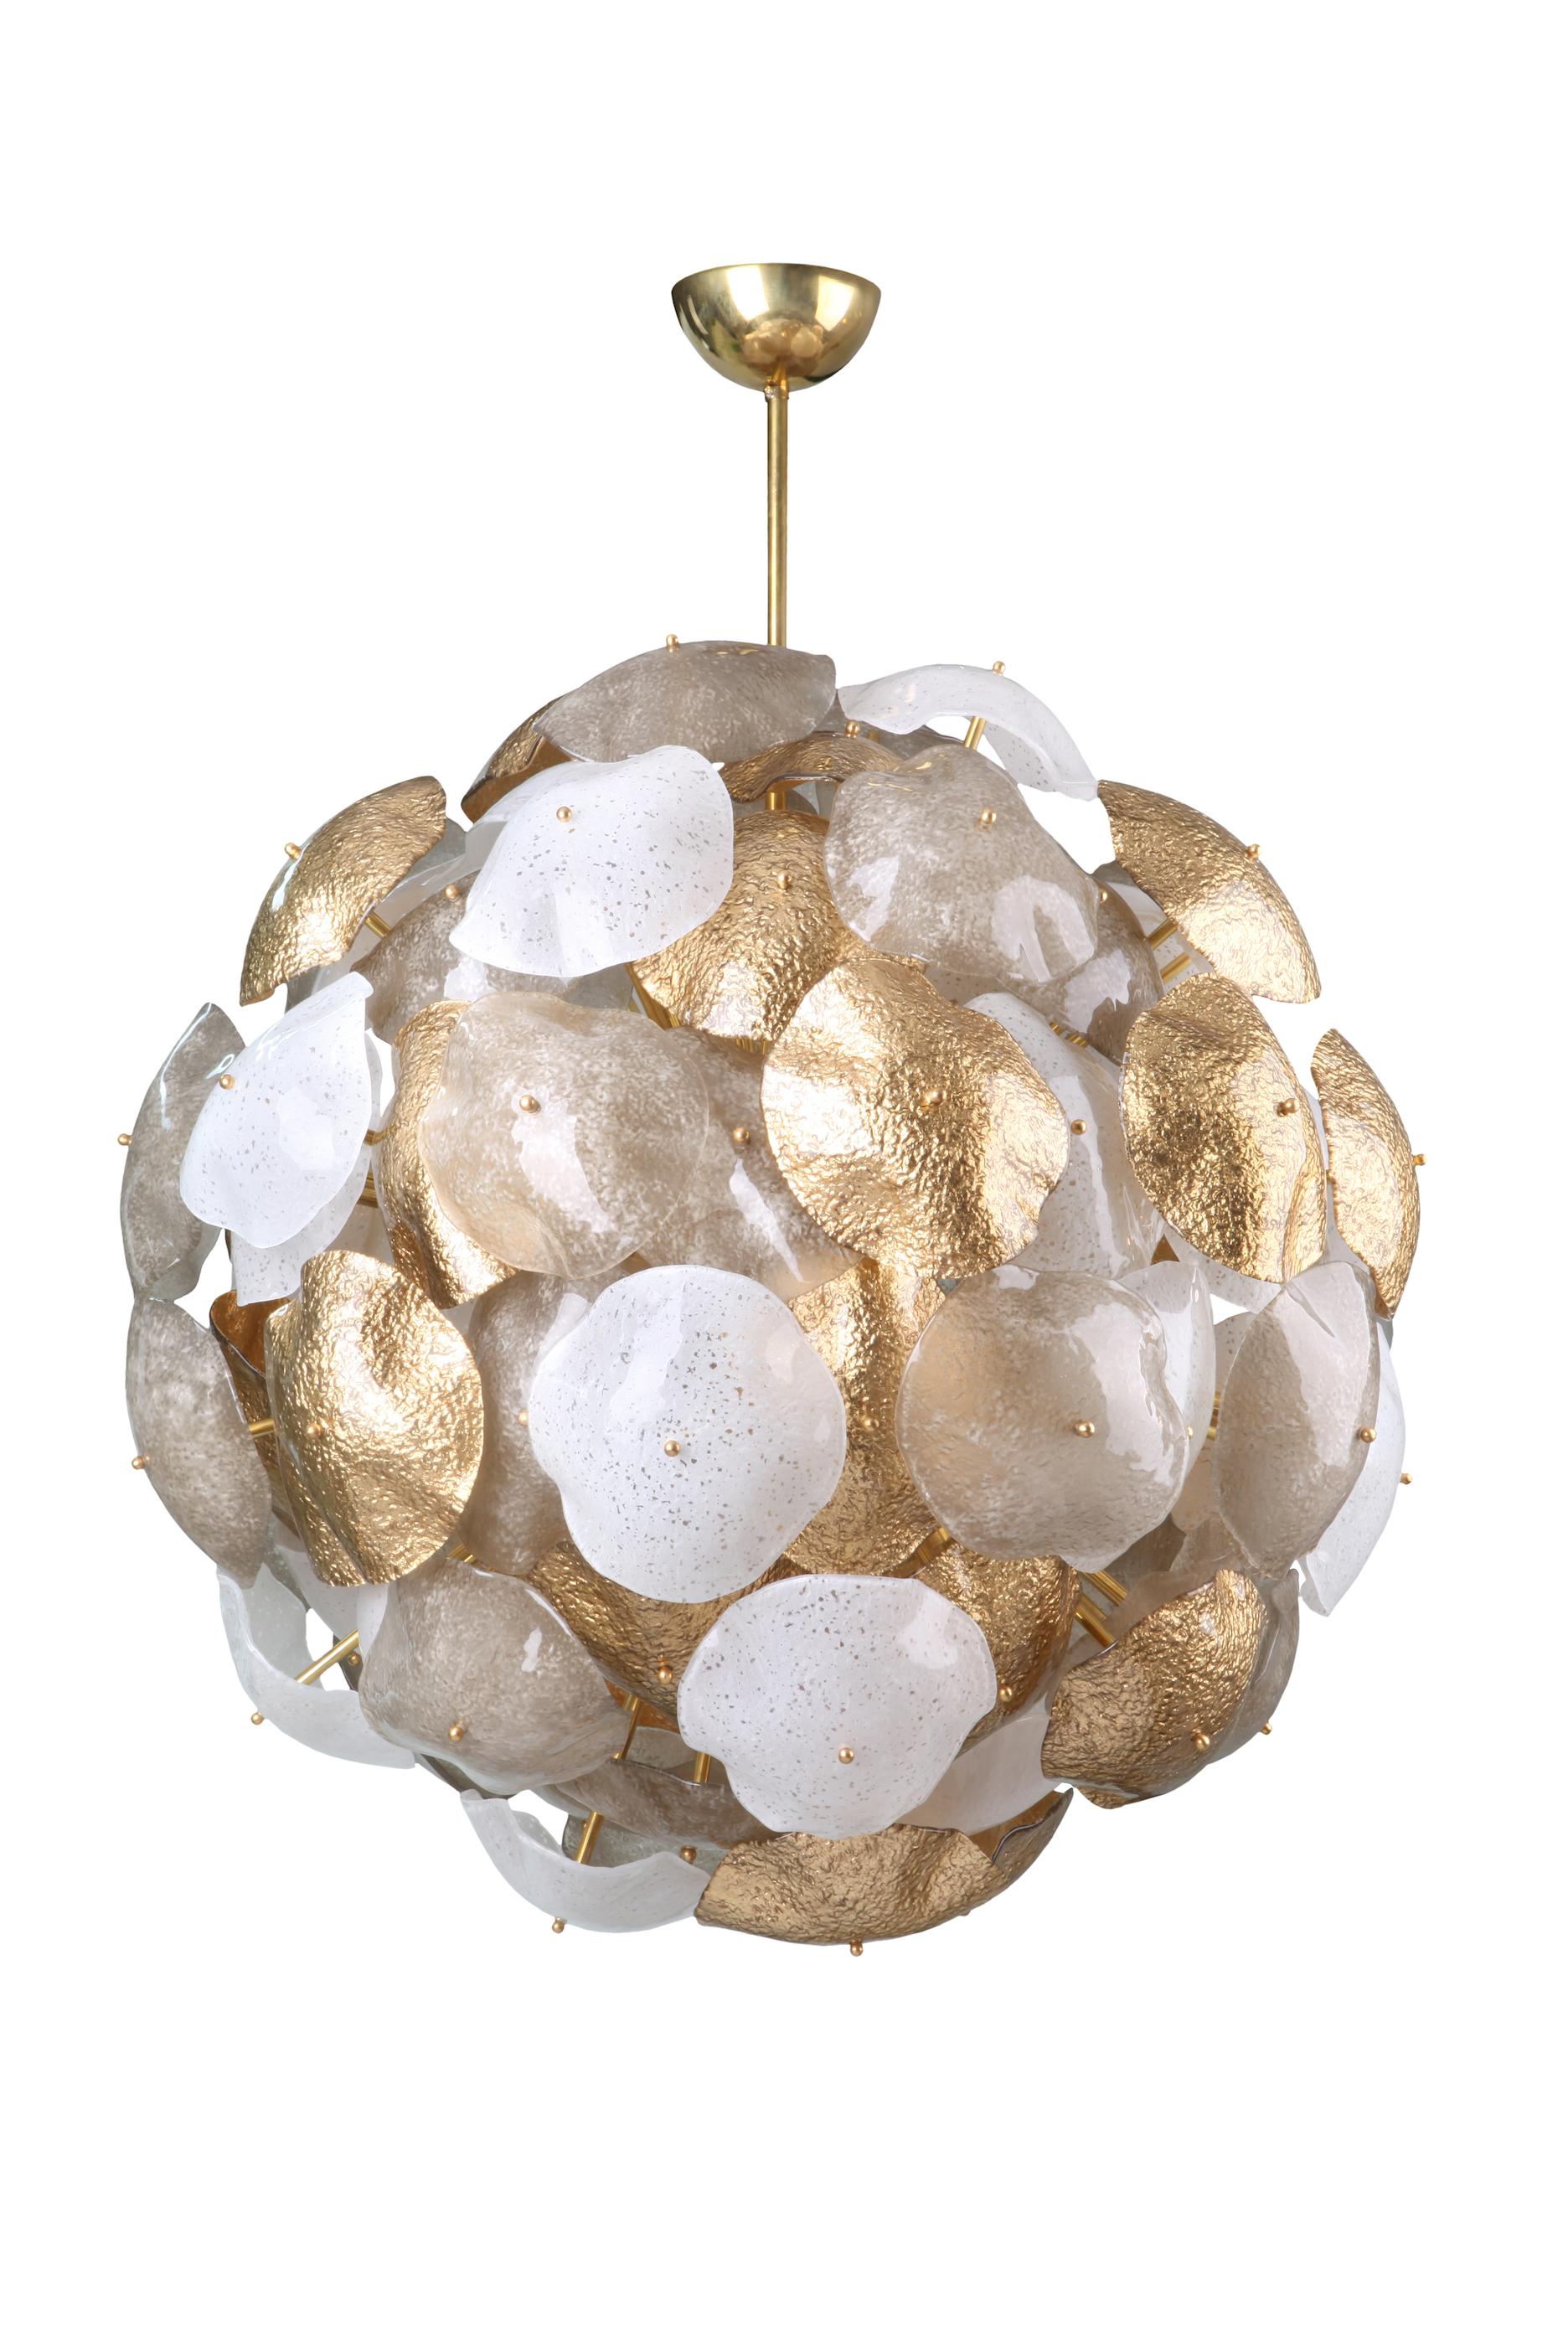 Handcrafted Murano glass freeform discs, 24-carat gold leaf, brass frame and details.

This Sputnik chandelier is made to order with a natural brass orb, natural brass rods at two lengths, a brass drop rod and brass canopy. The glass discs are hand